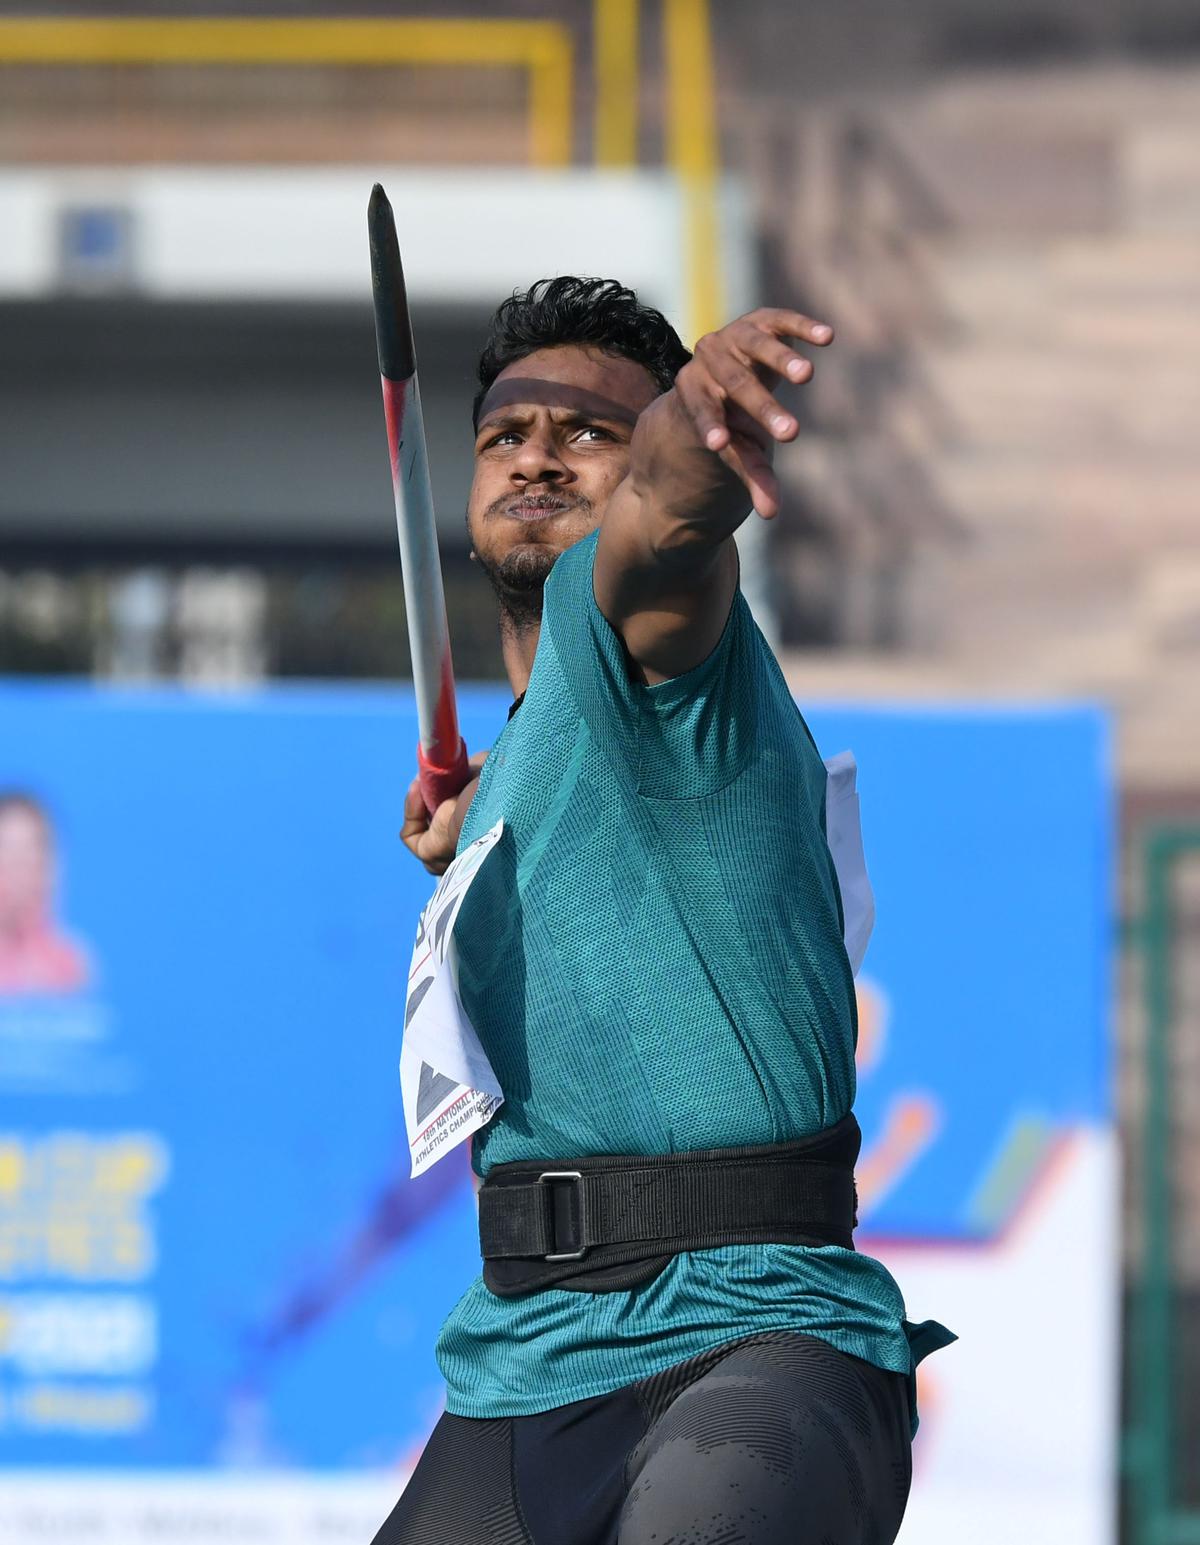 New high: Yashvir Singh took the bronze with a career-best 78.62m at the inter-State Nationals in Chennai recently.